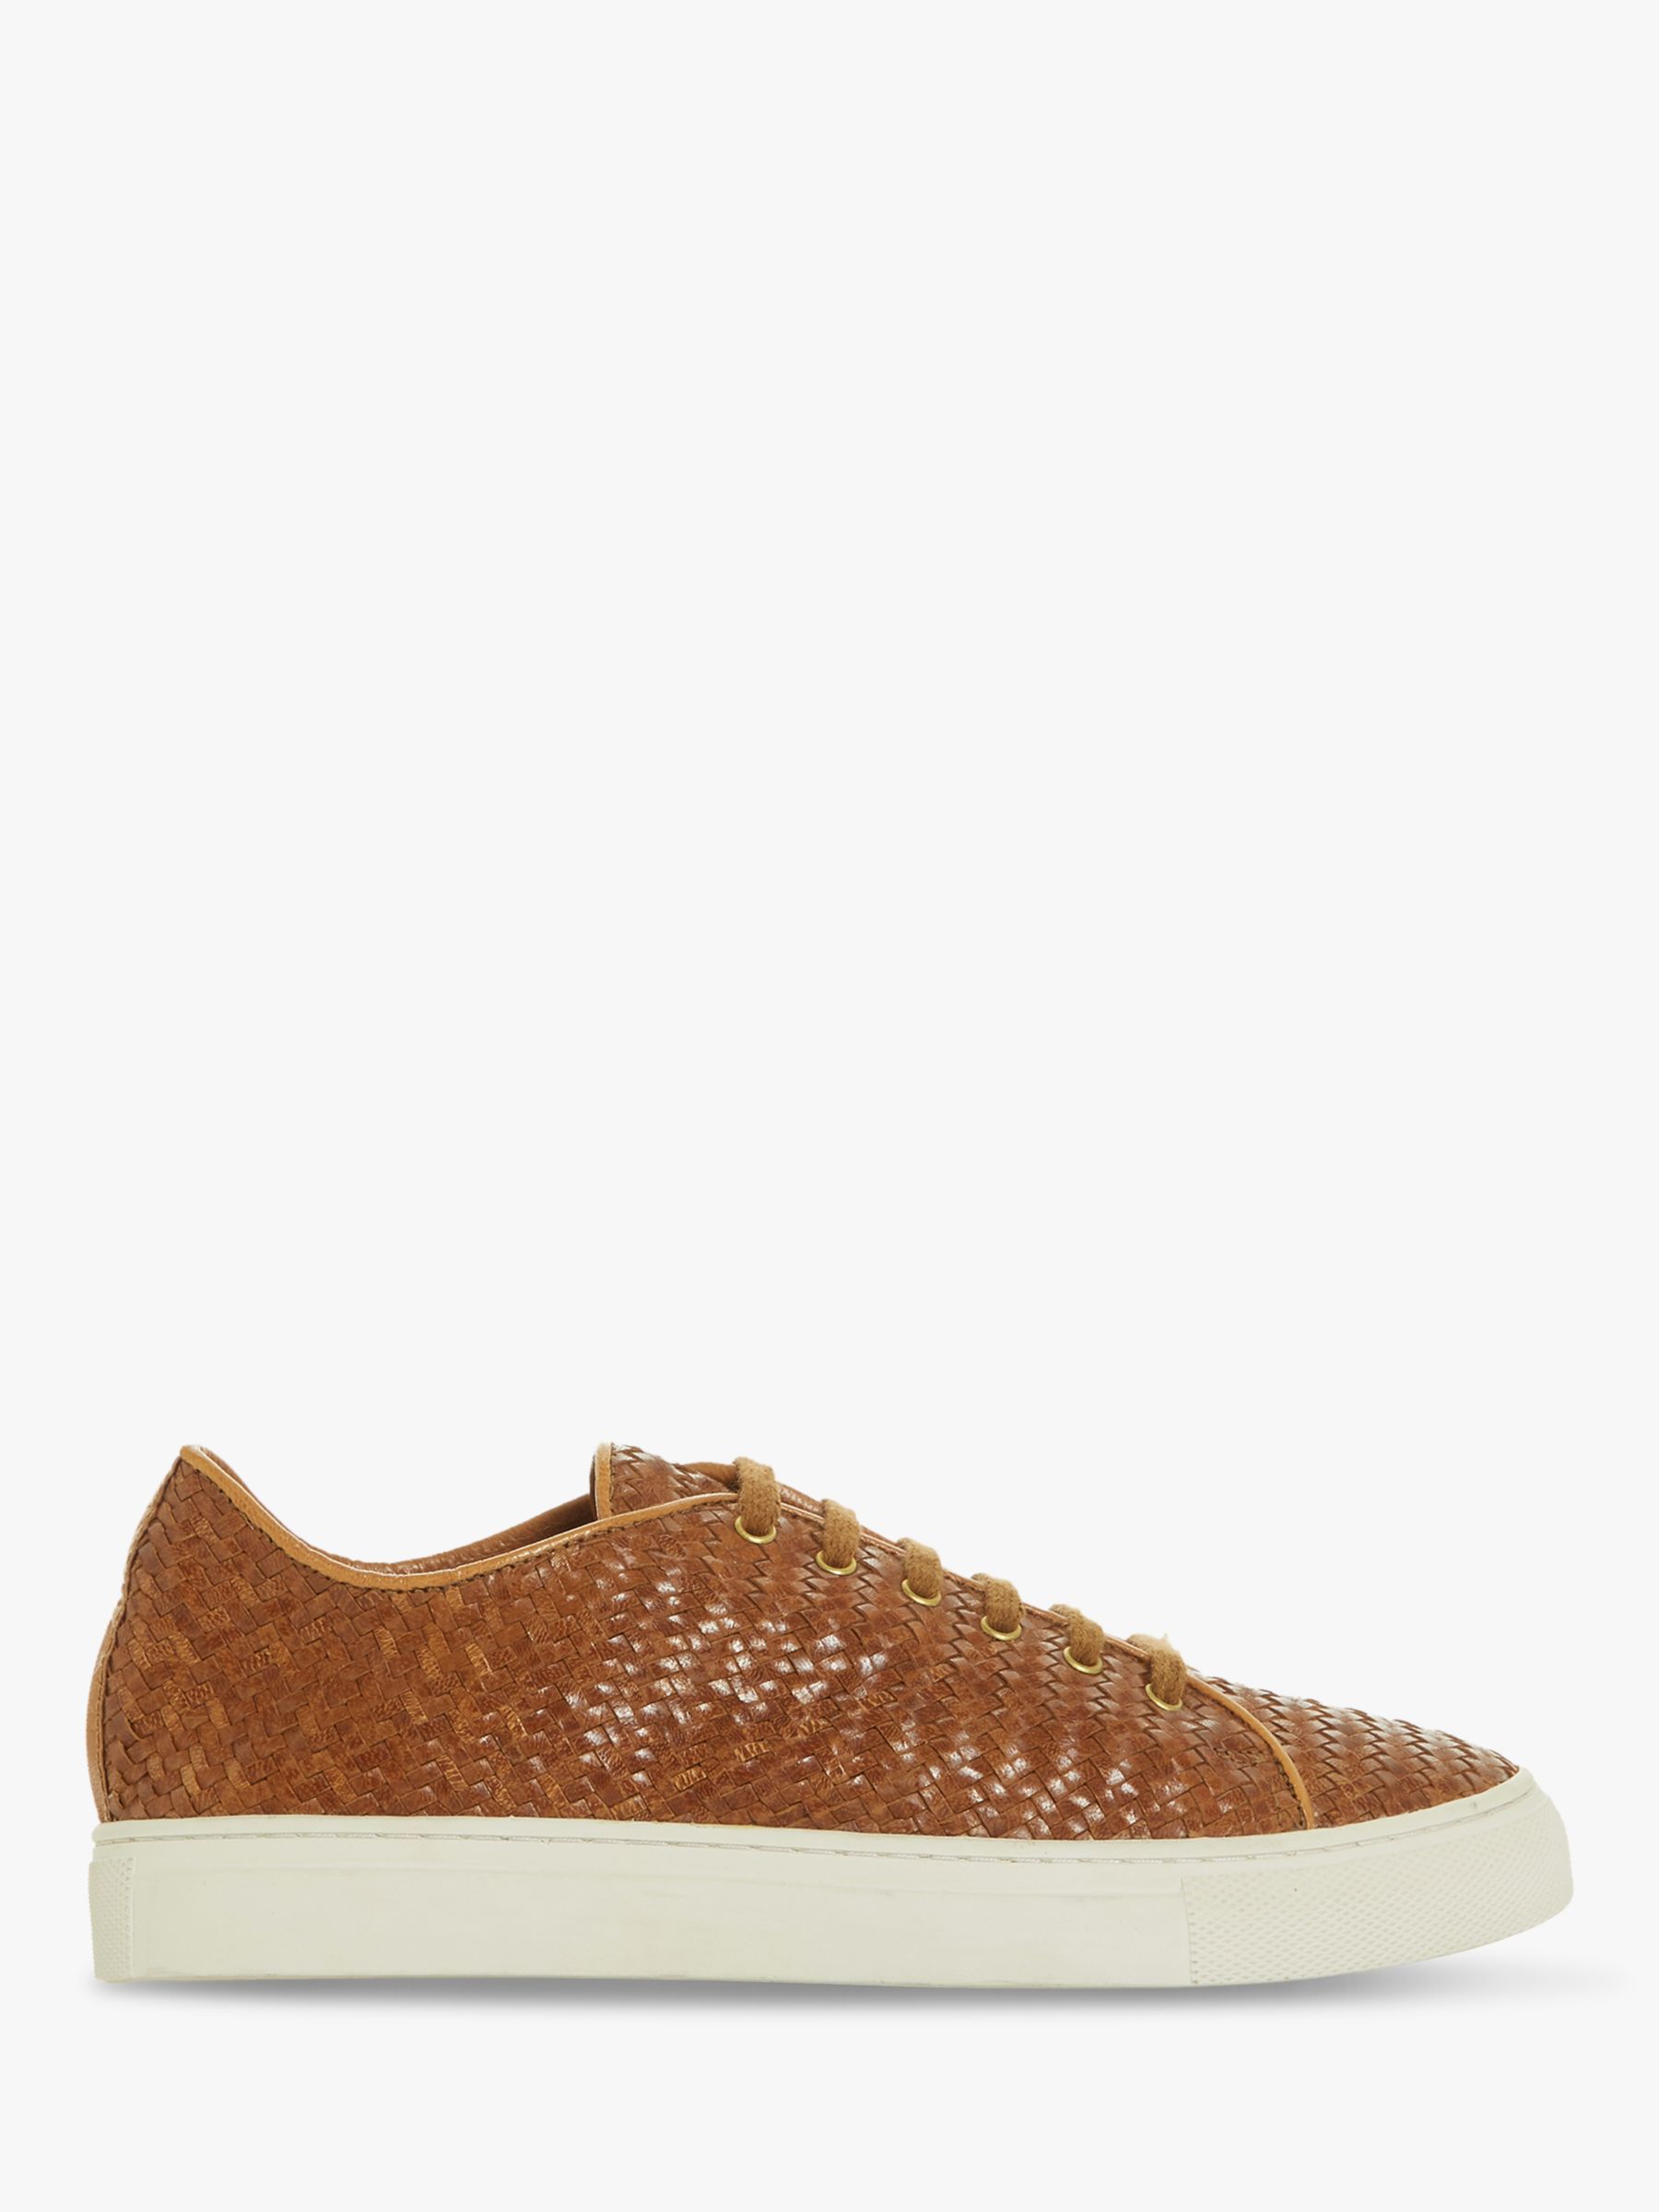 Bertie Endeavore Leather Low Top Trainers